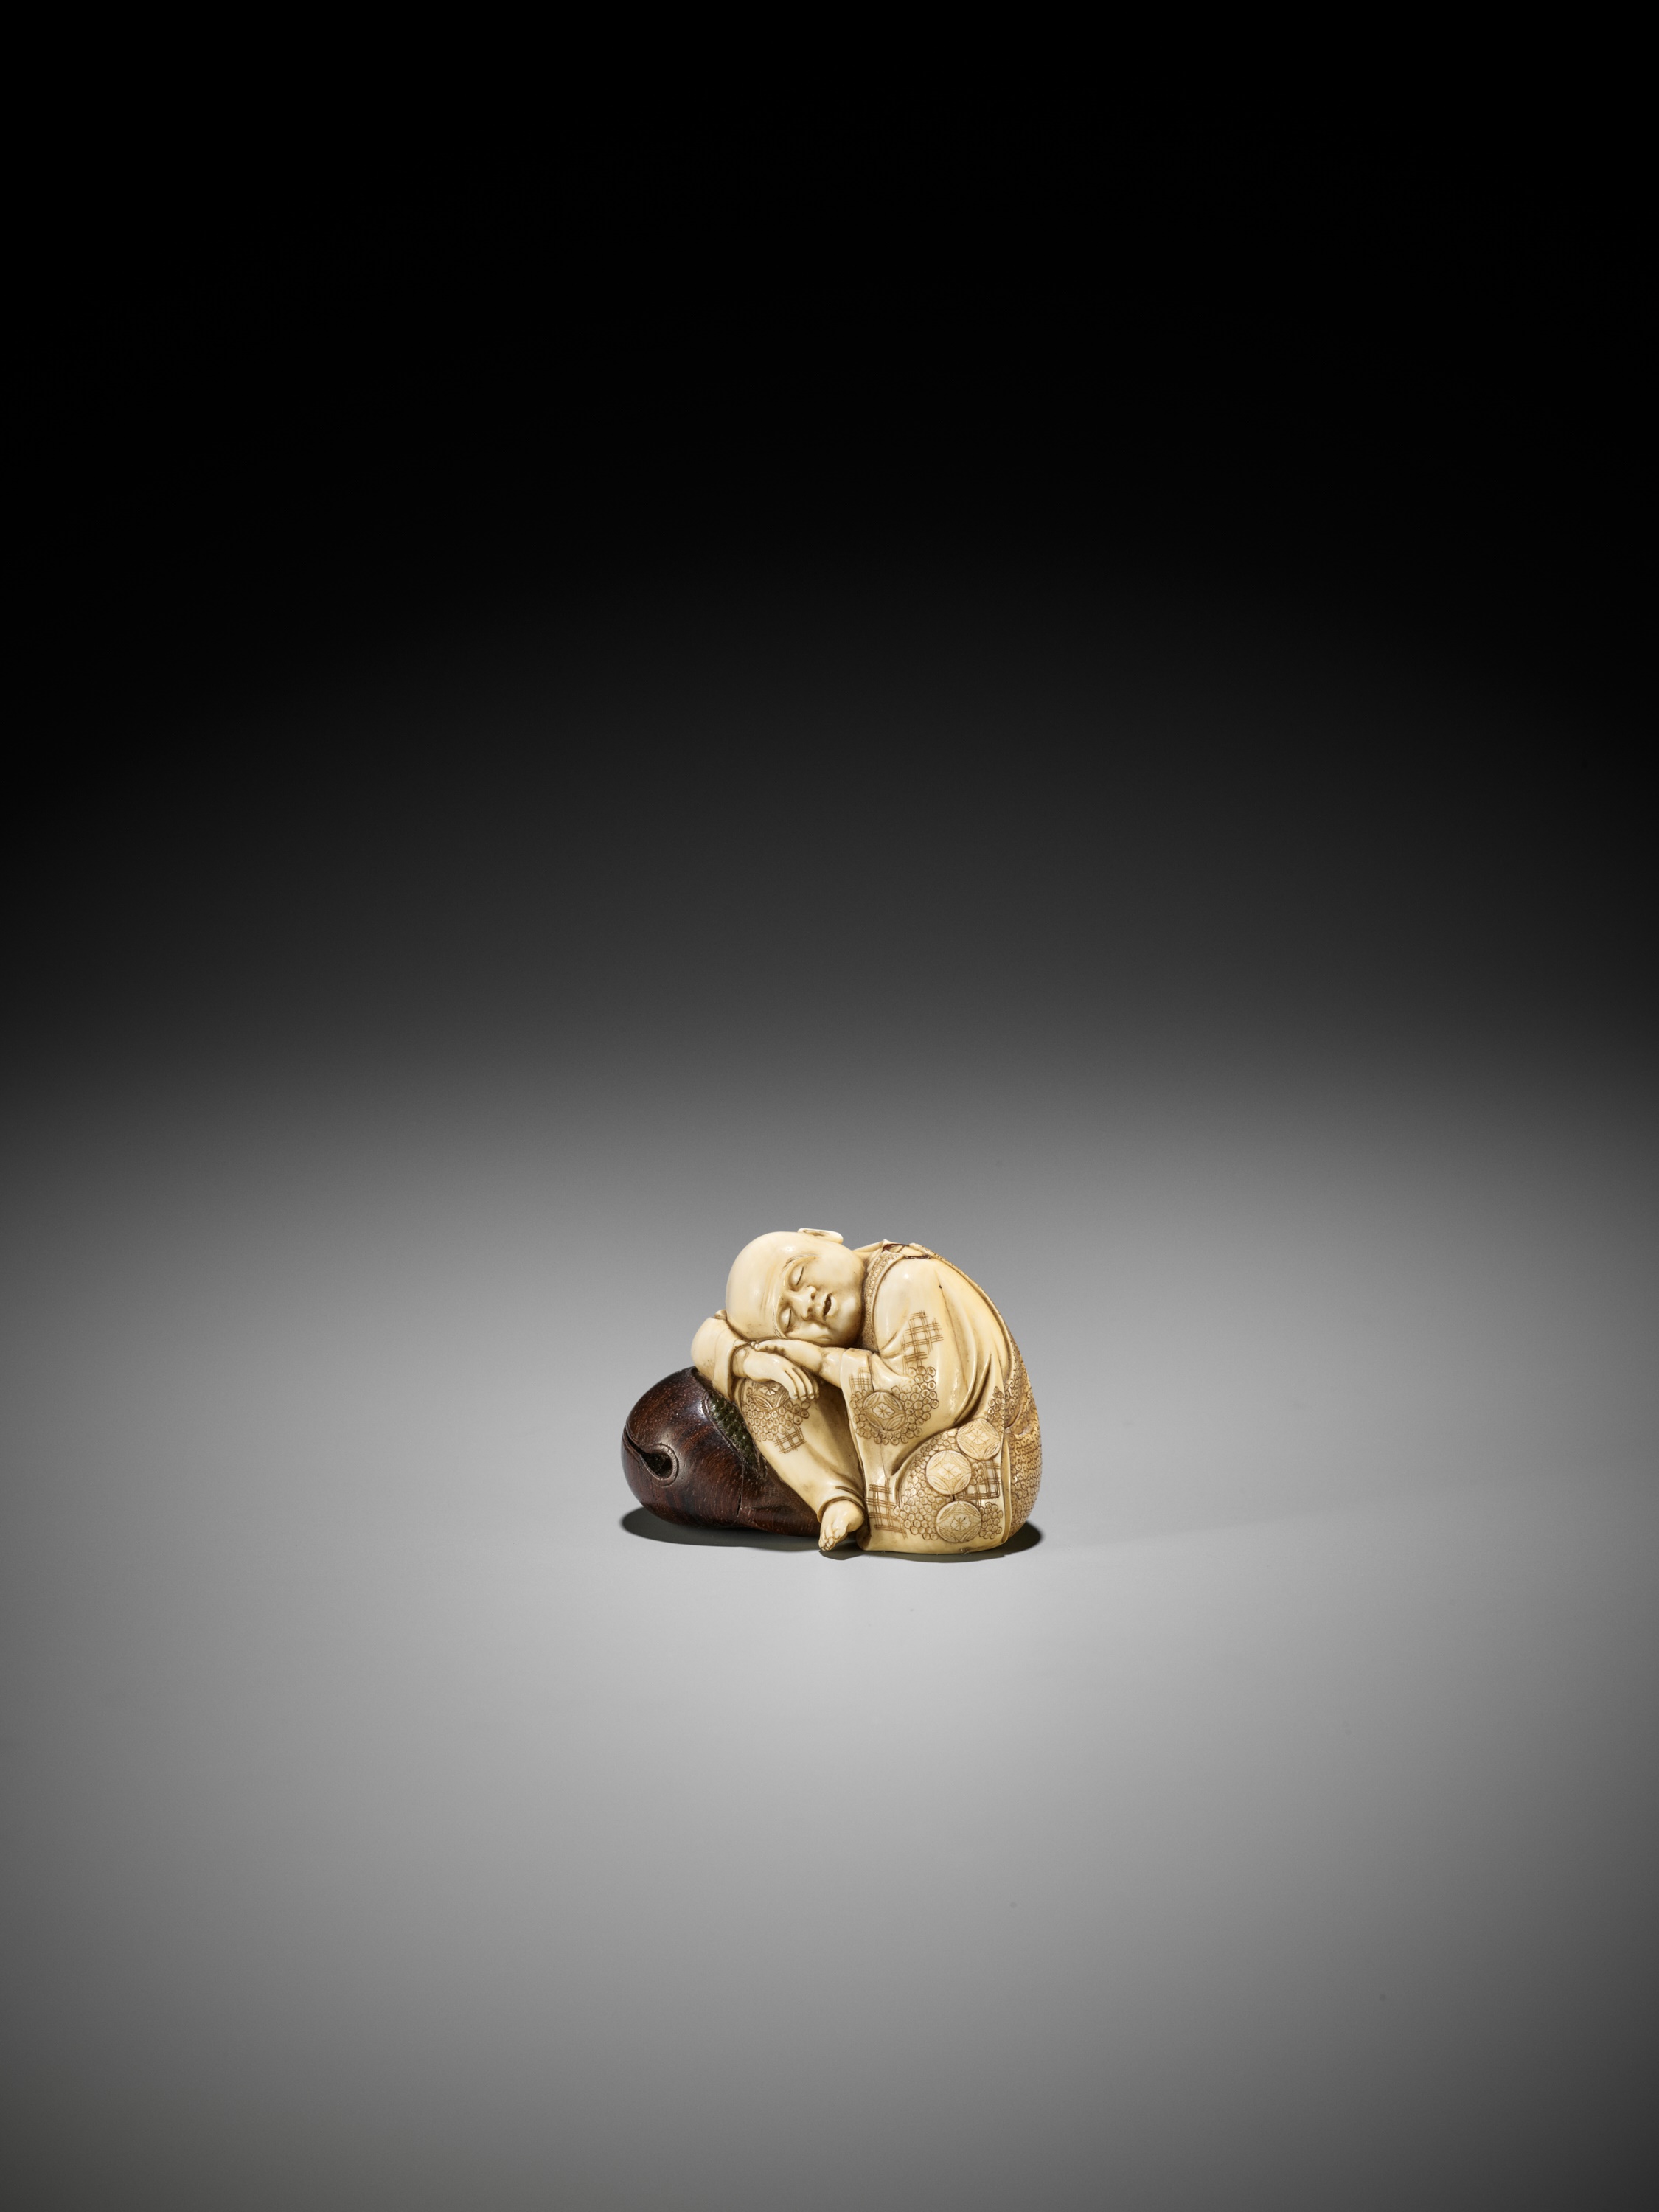 GYOKUSUI: A FINE TOKYO SCHOOL IVORY AND WOOD NETSUKE OF A PRIEST RESTING ON A MOKUGYO - Image 8 of 11